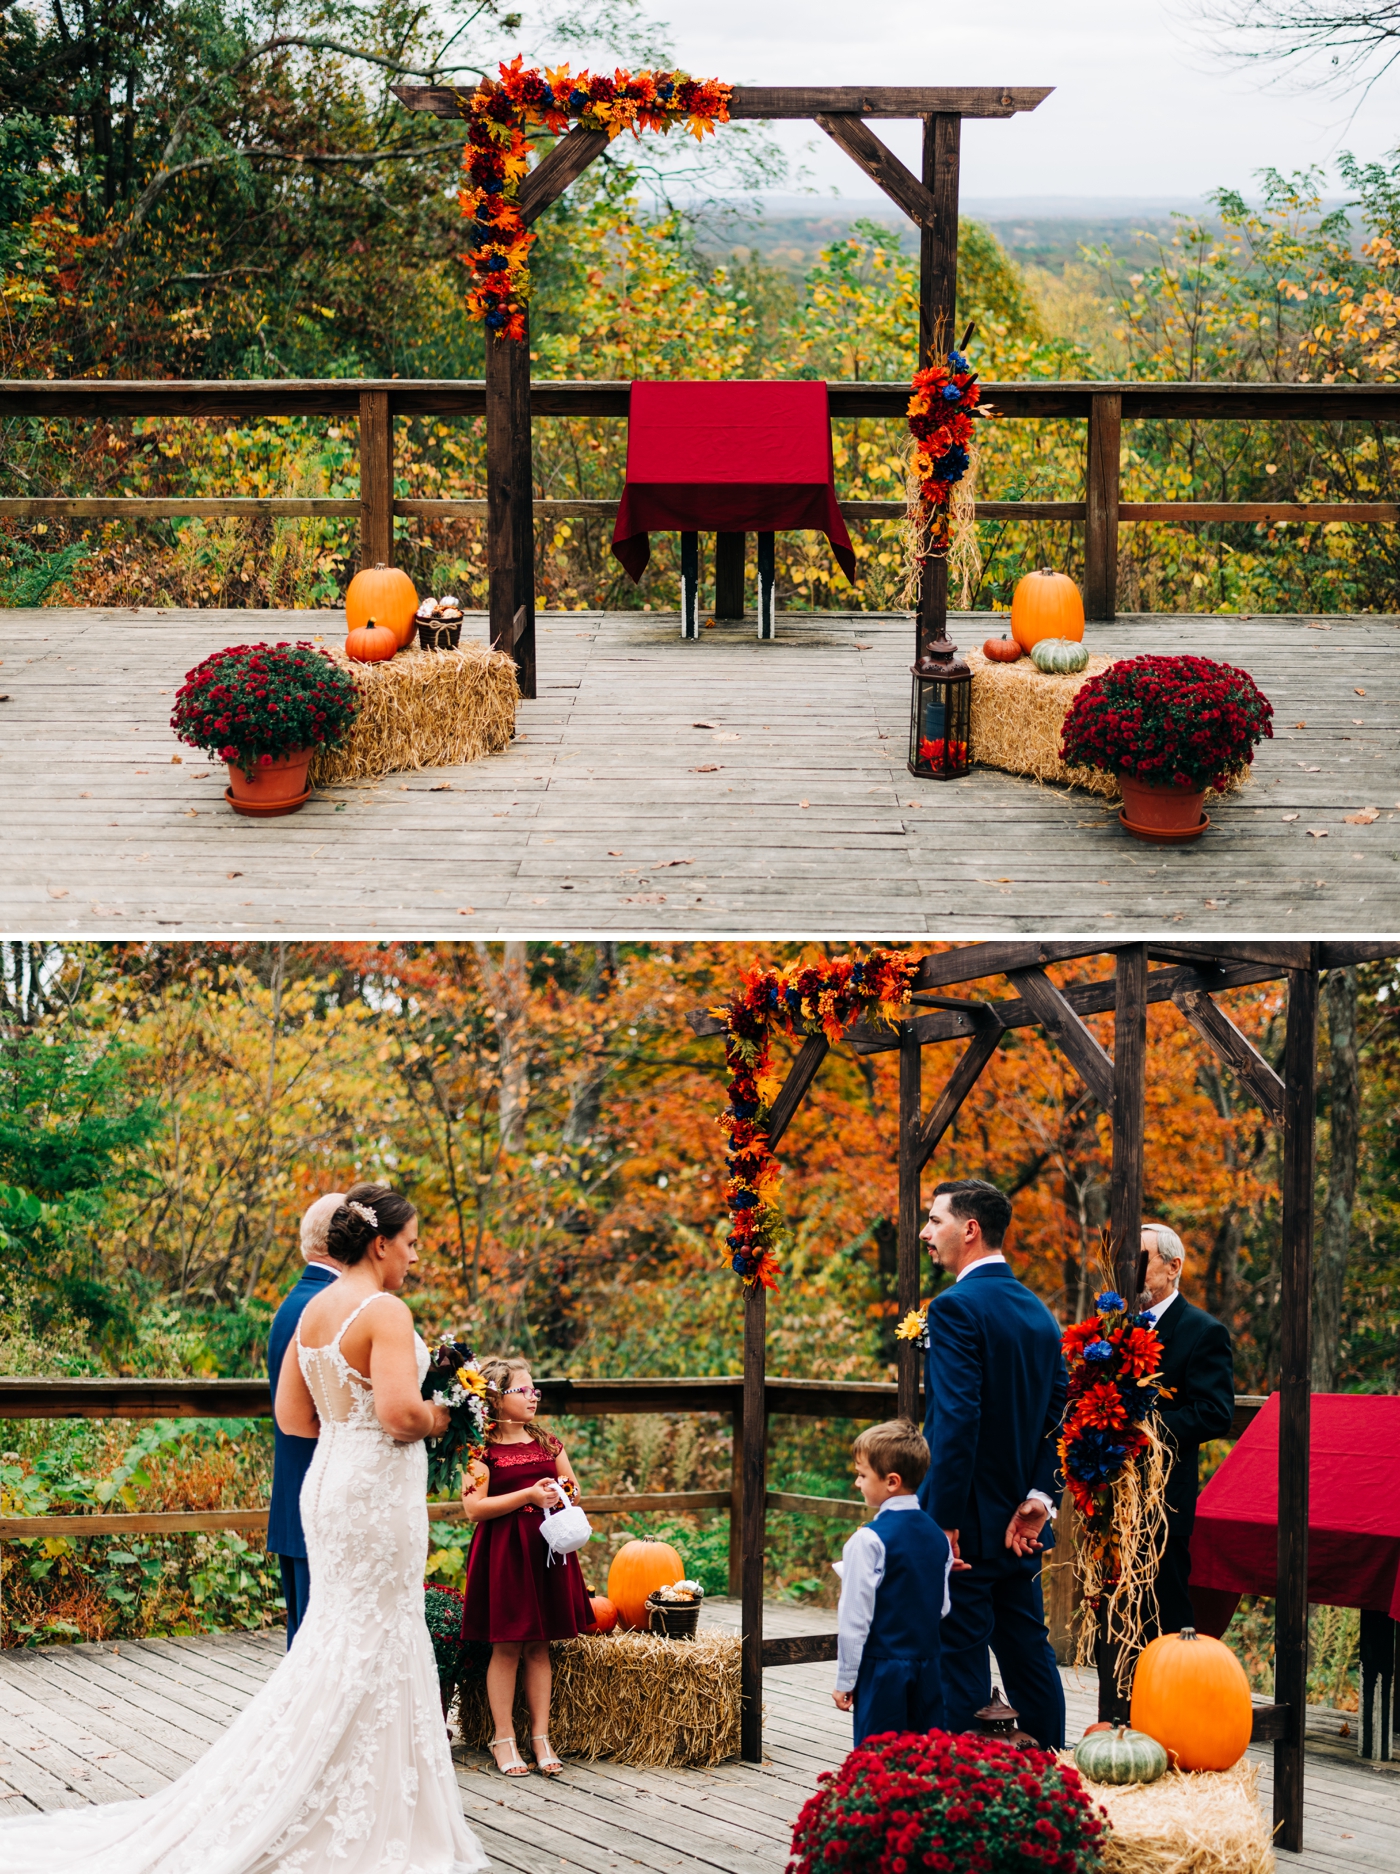 Planning a fall wedding at Brown County State Park